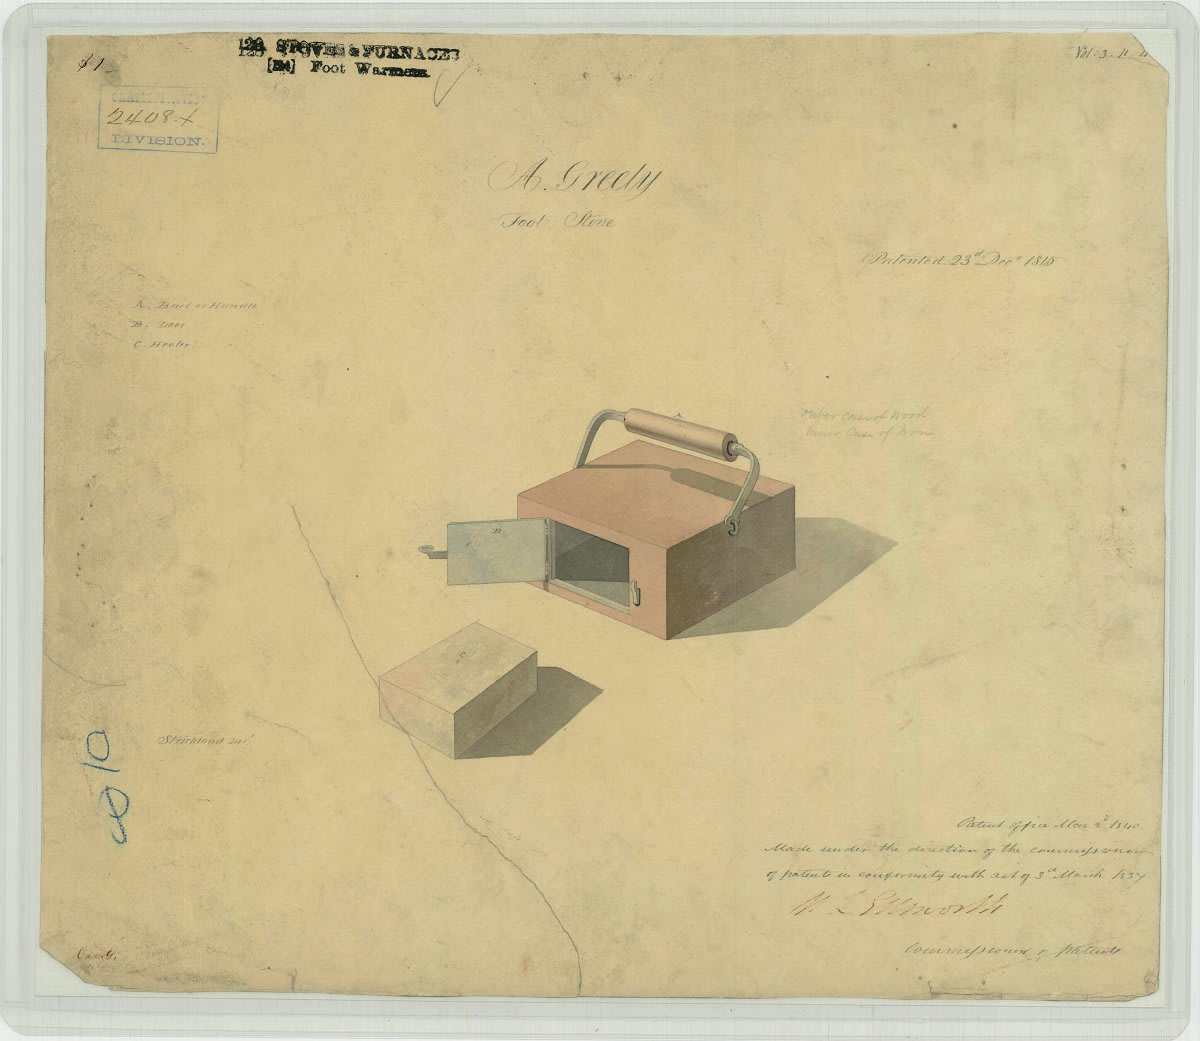 Suffering from cold feet? Perhaps you'll like this #invention. A, Greely's PatentDrawing for a Foot Stove, OTD in 1815